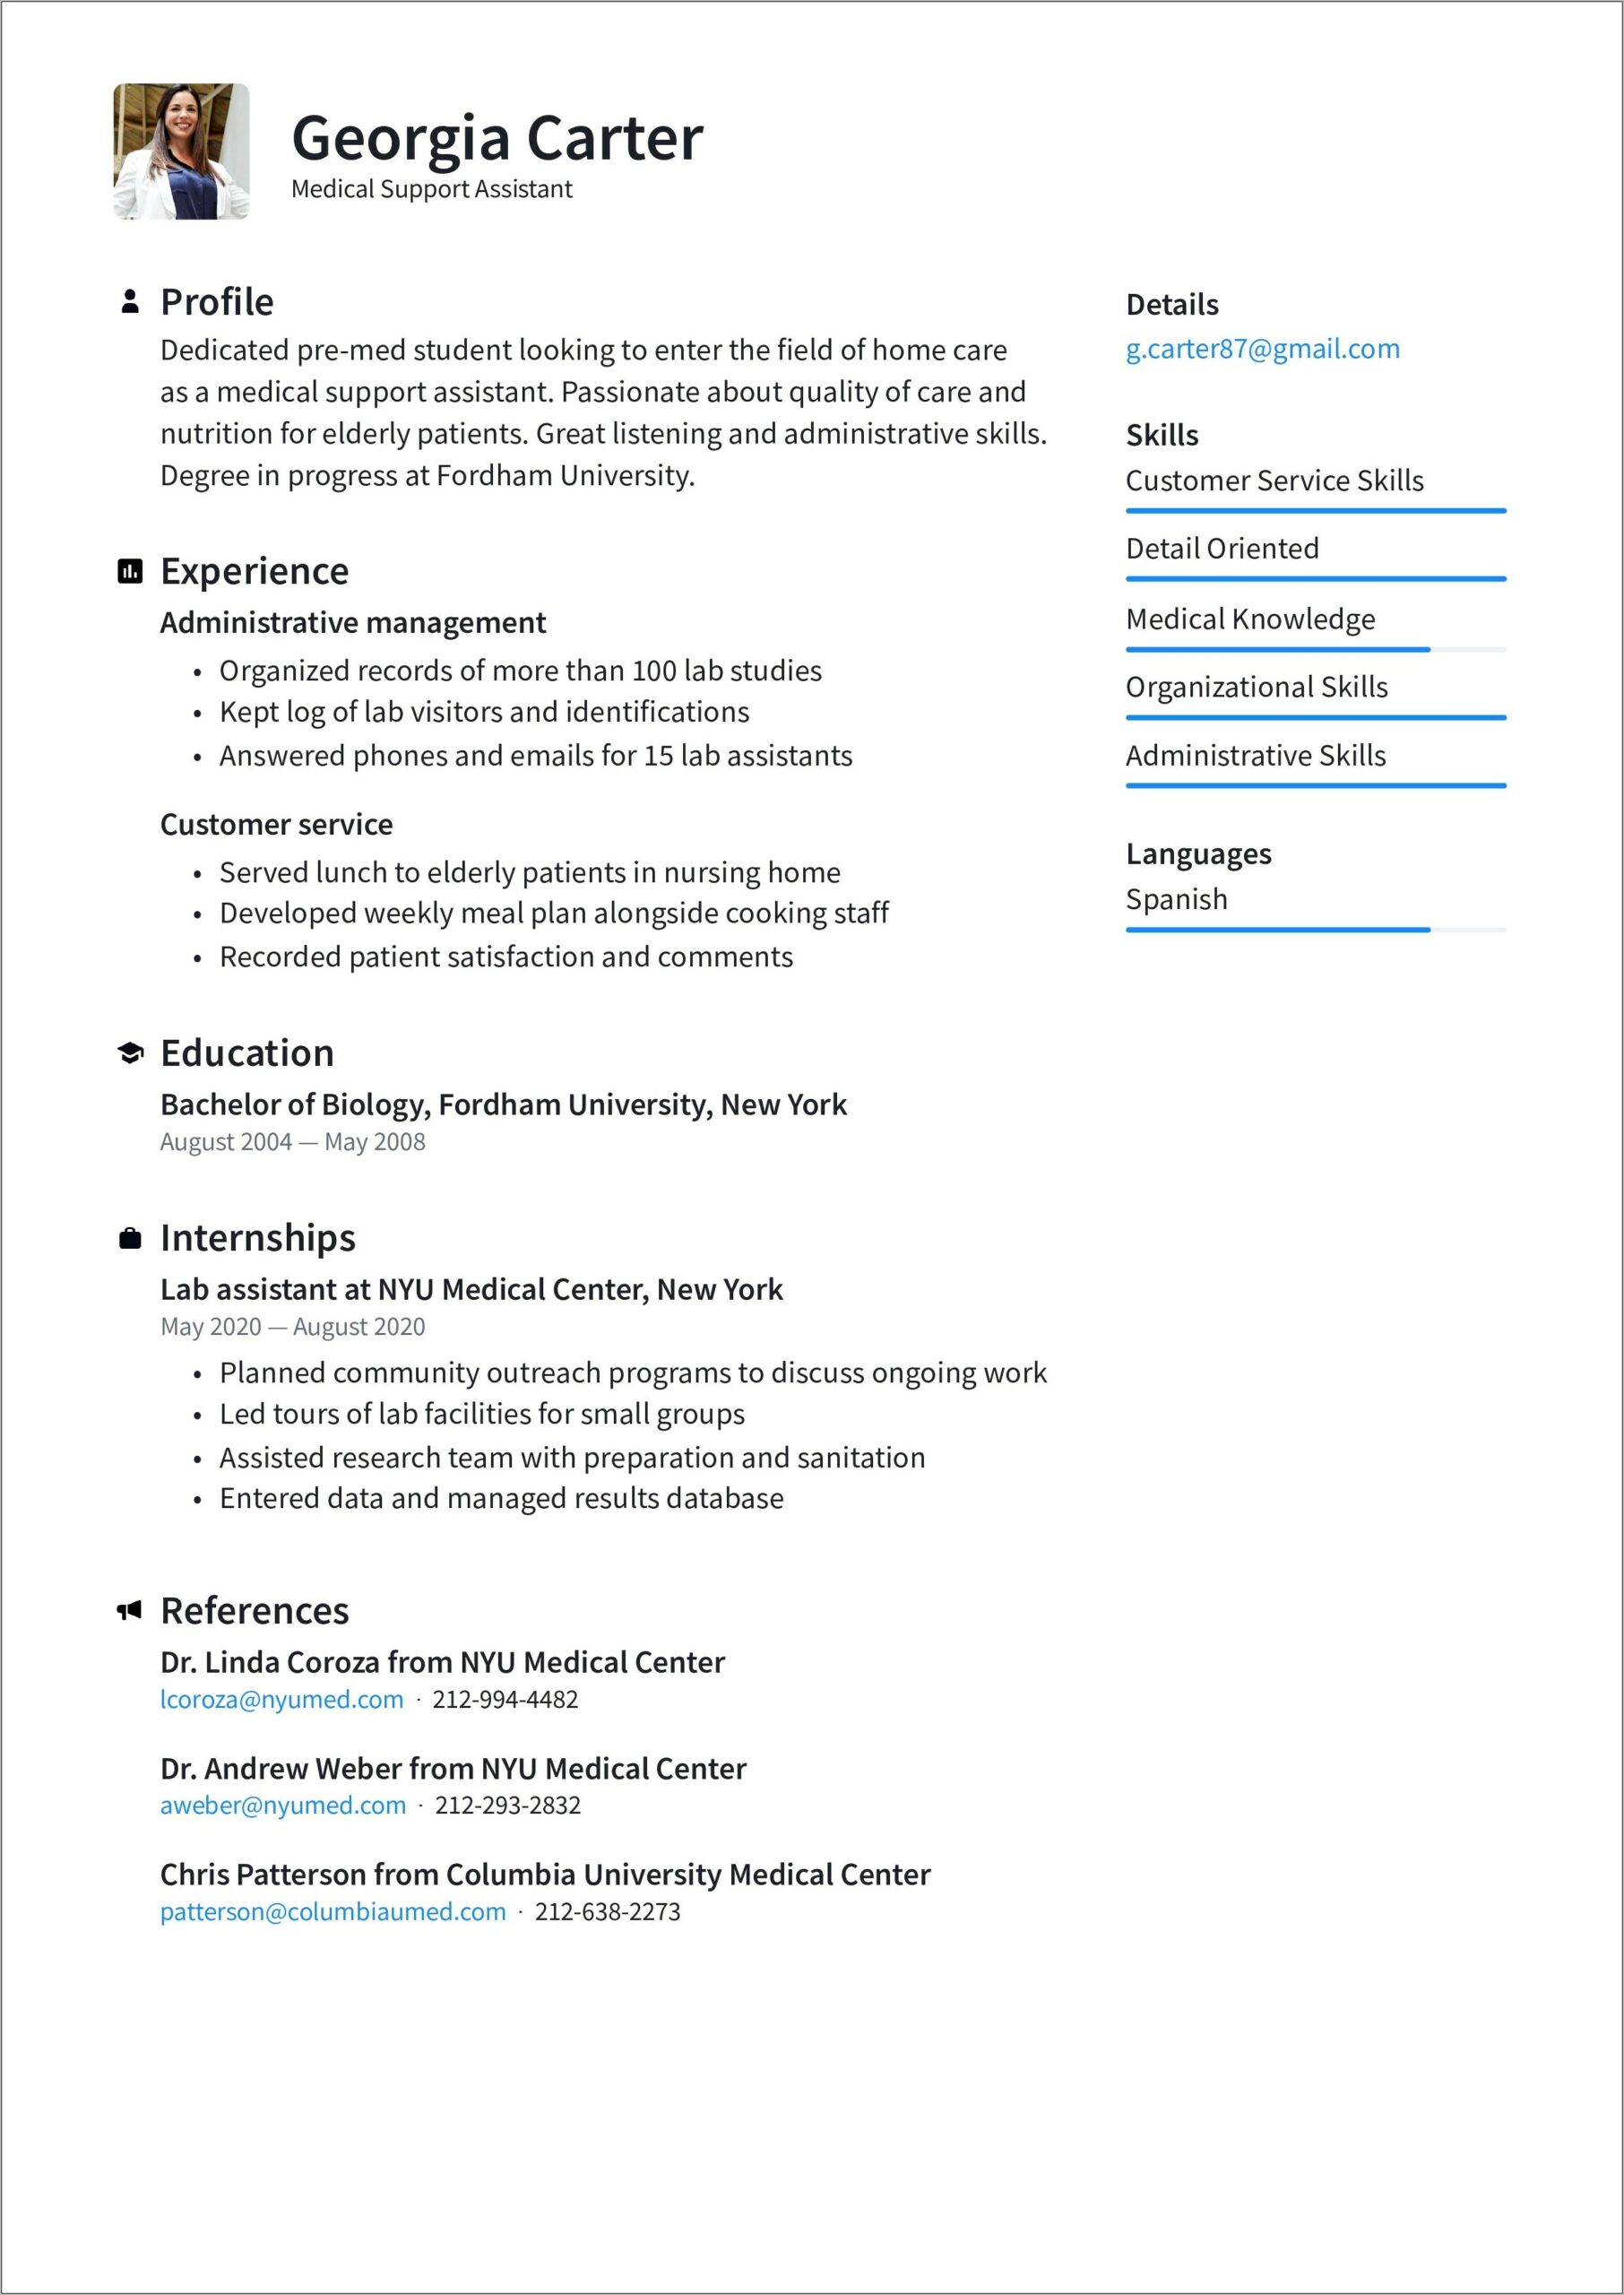 A Resume Groups Information By Skills And Accomplishments